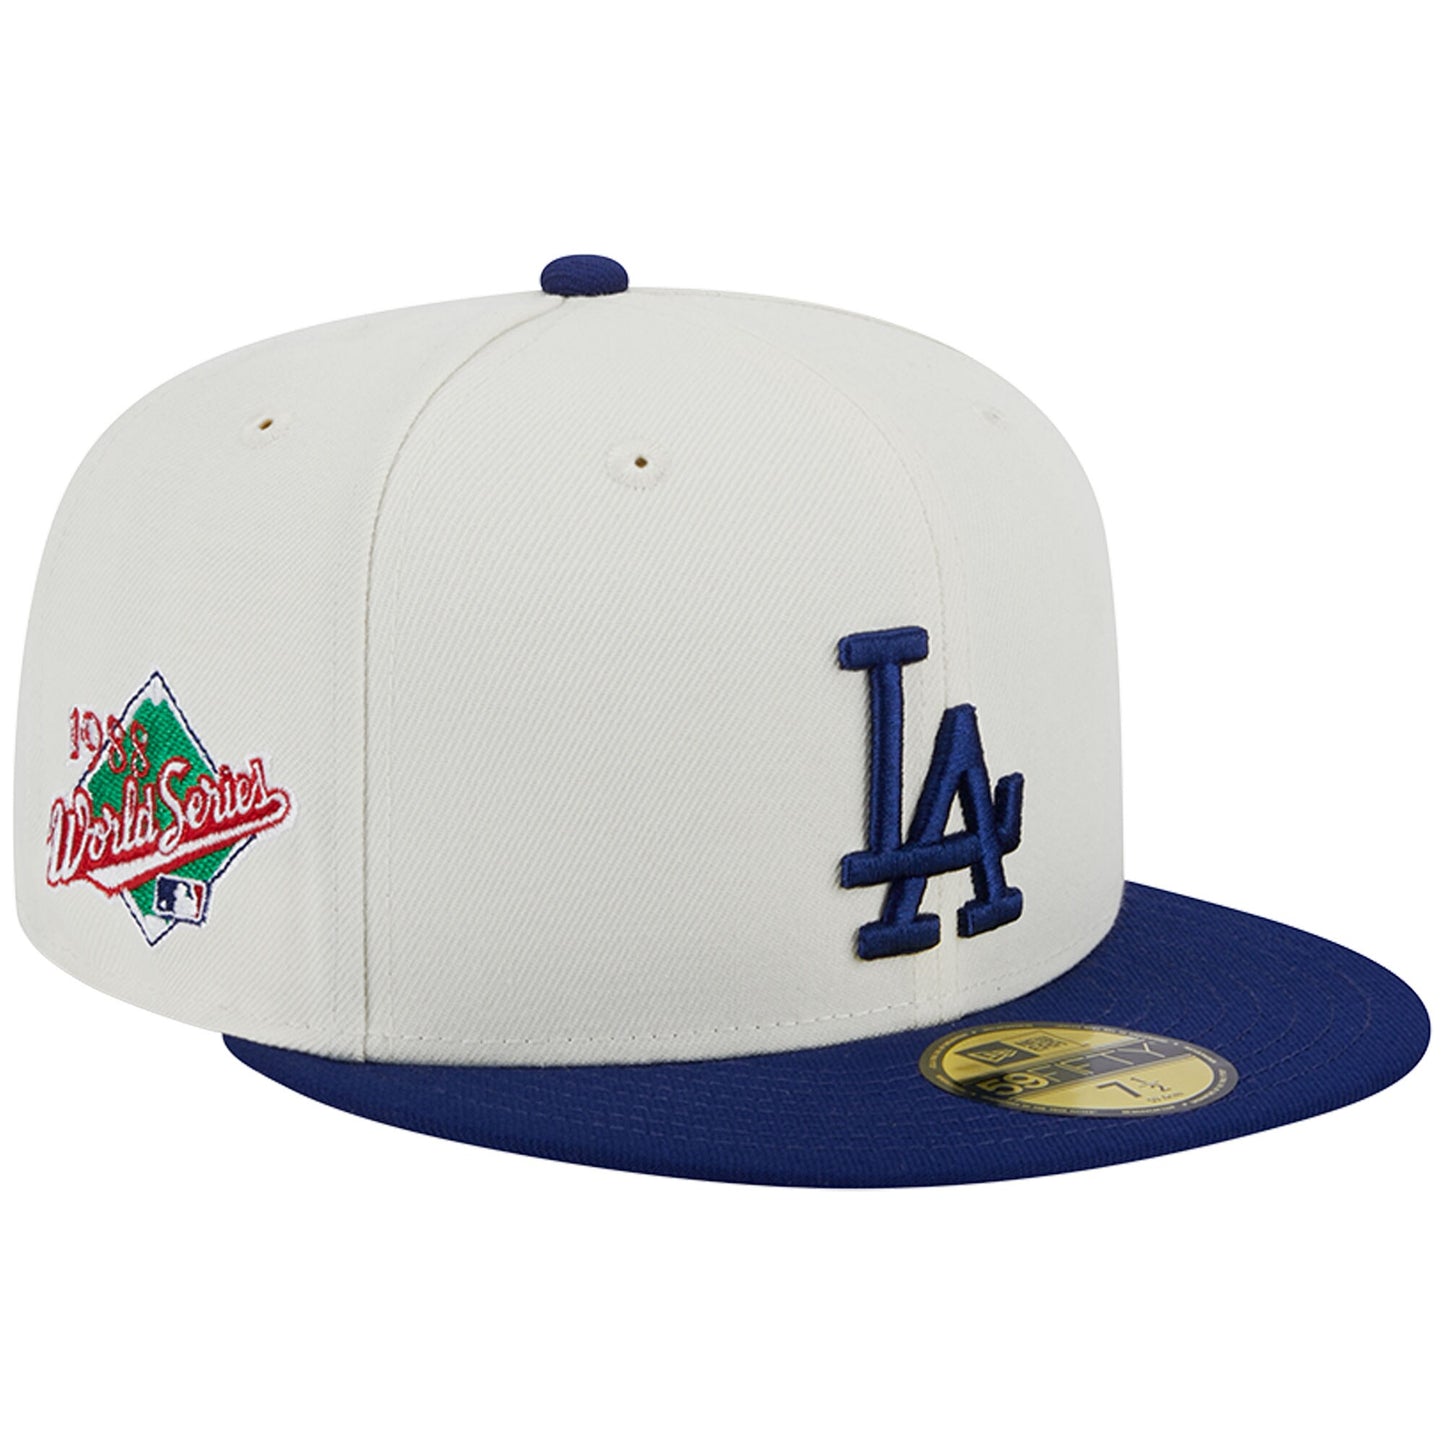 Los Angeles Dodgers New Era Retro 59FIFTY Fitted Hat - Stone/Royal